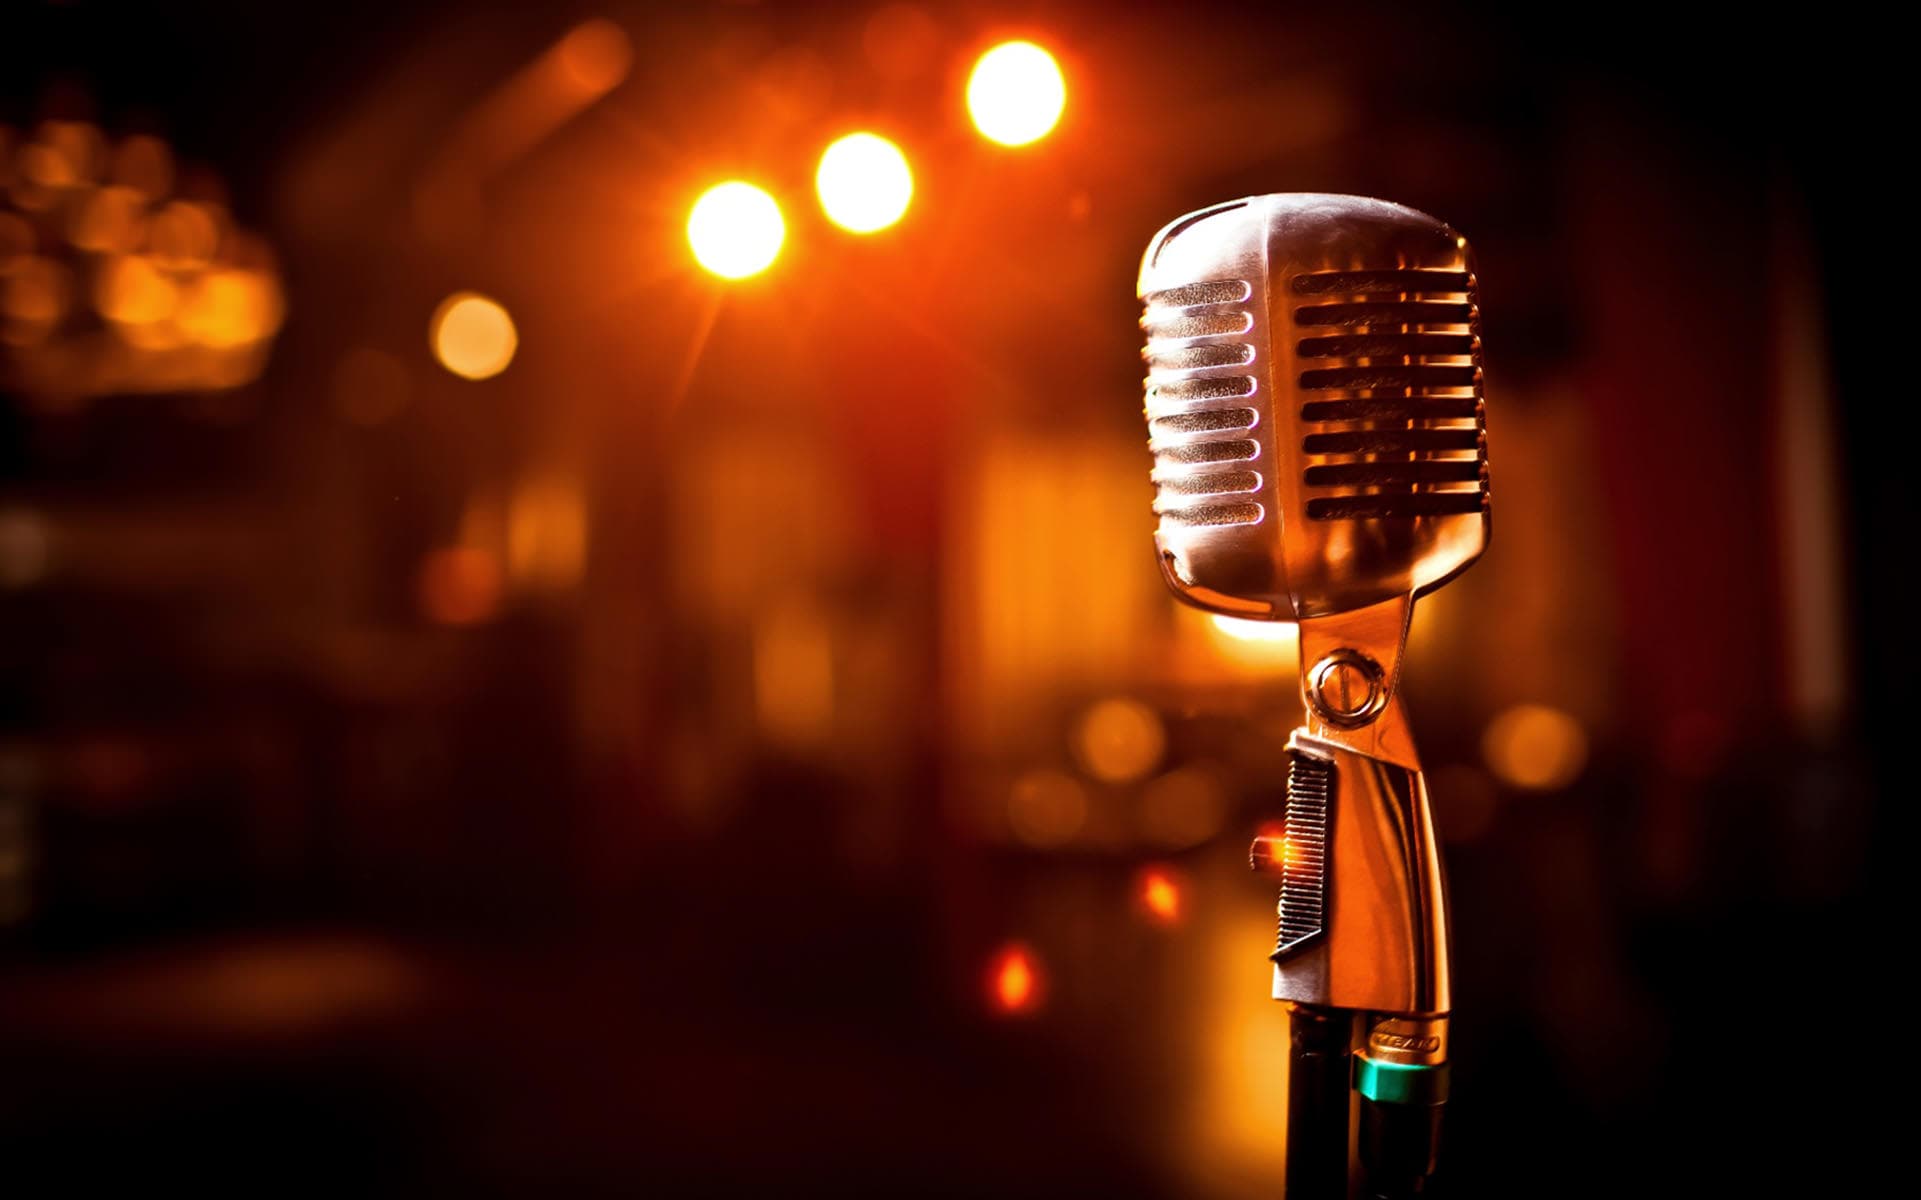 News from The Pierce - Open mic venues in San Jose